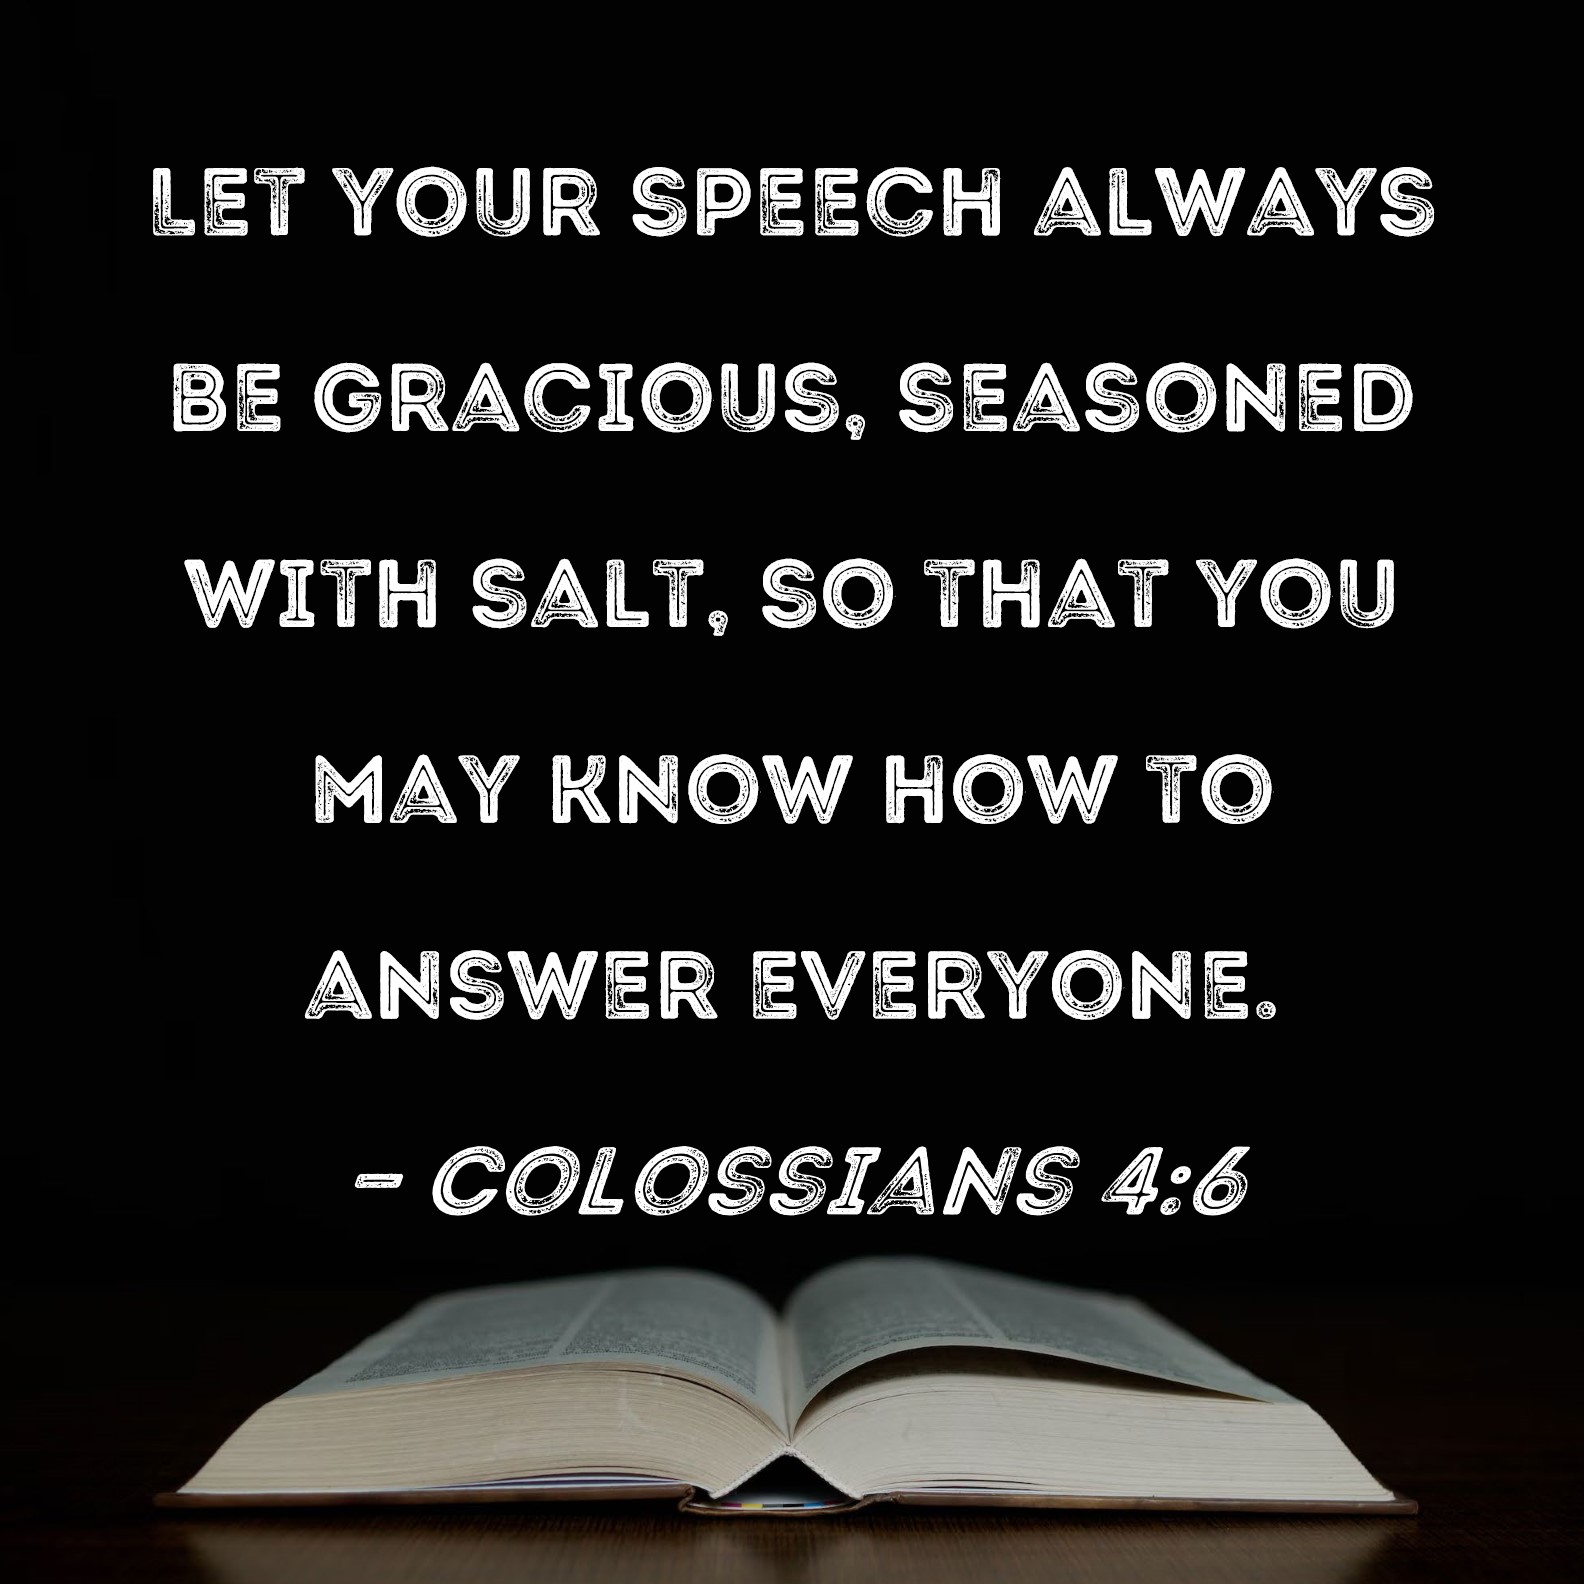 Colossians 4:6 Let your speech be alway with grace, seasoned with